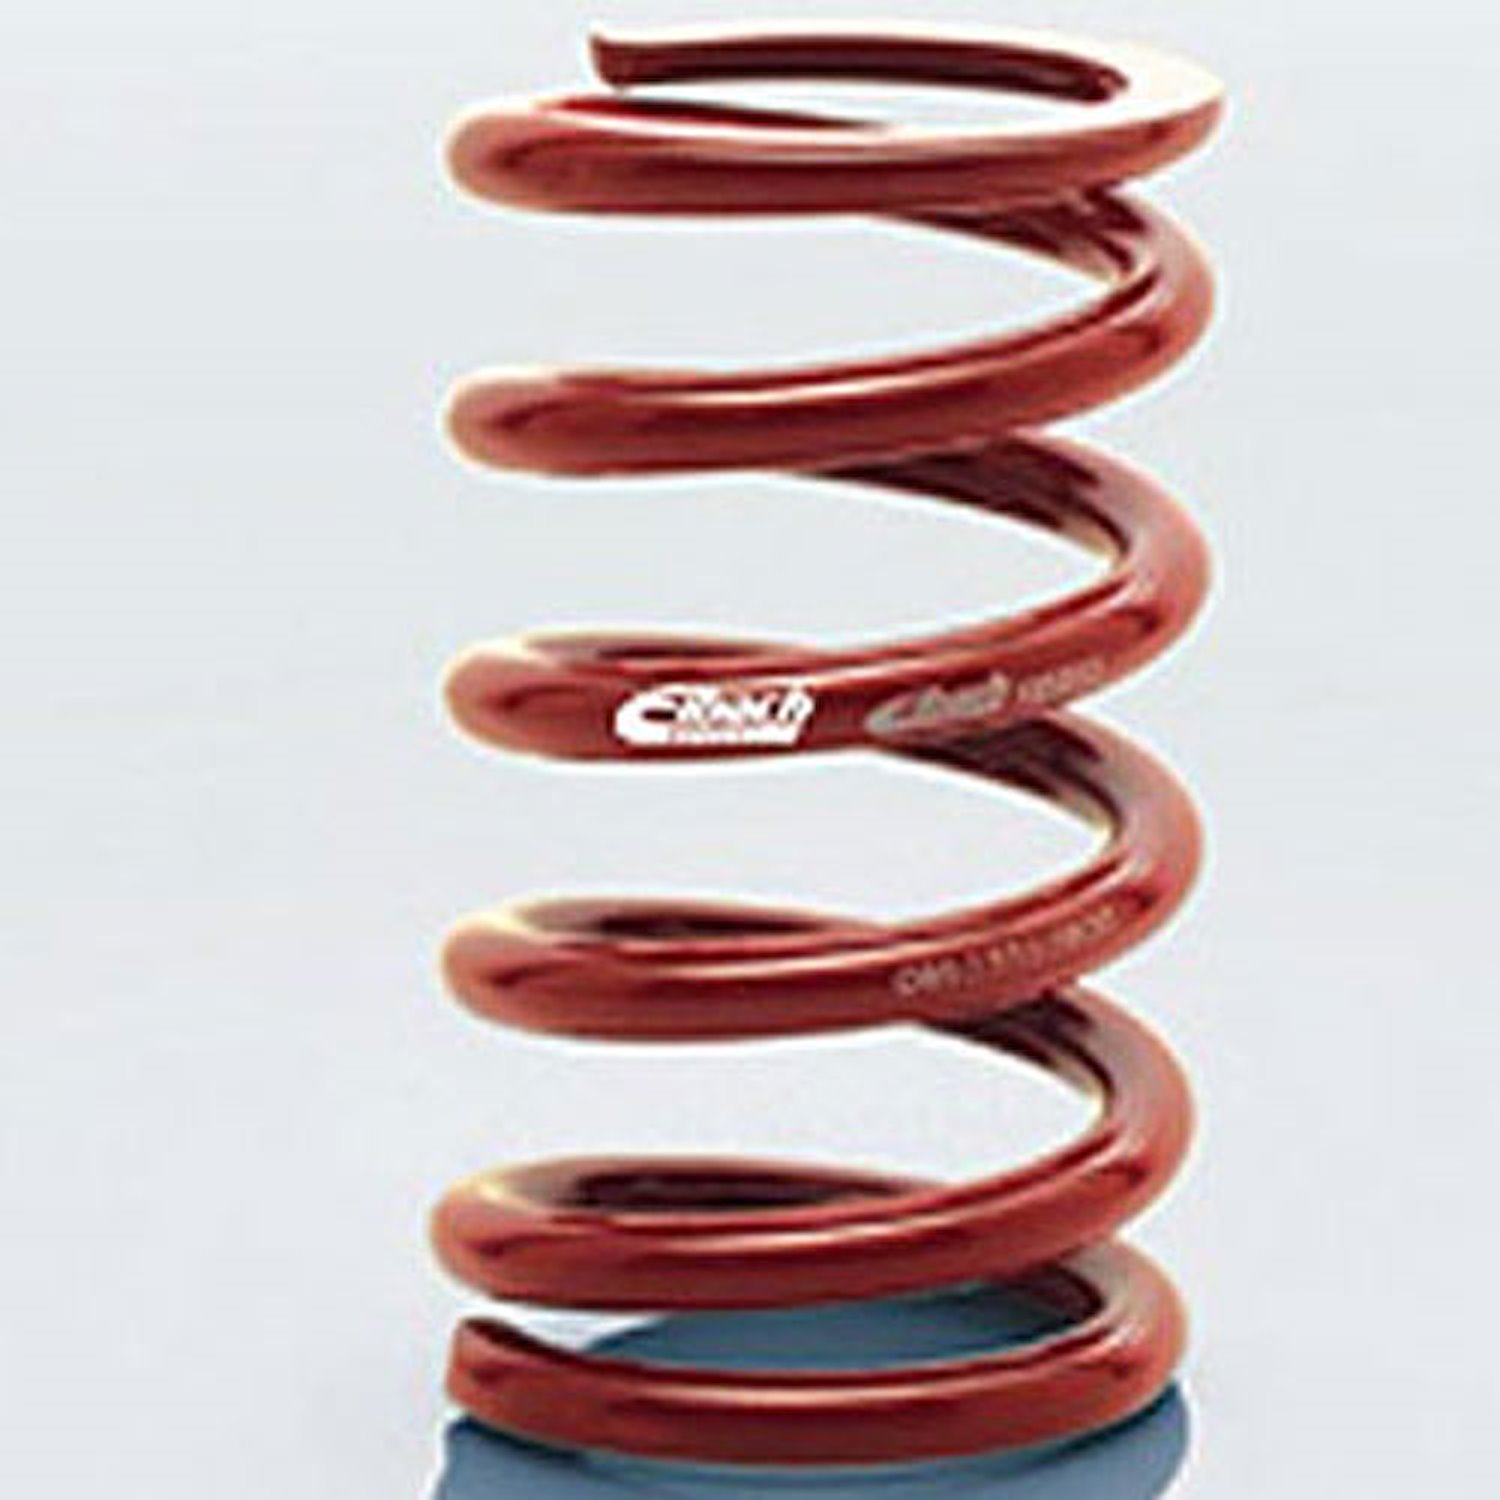 0950.550.0525 EIBACH CONVENTIONAL FRONT SPRING